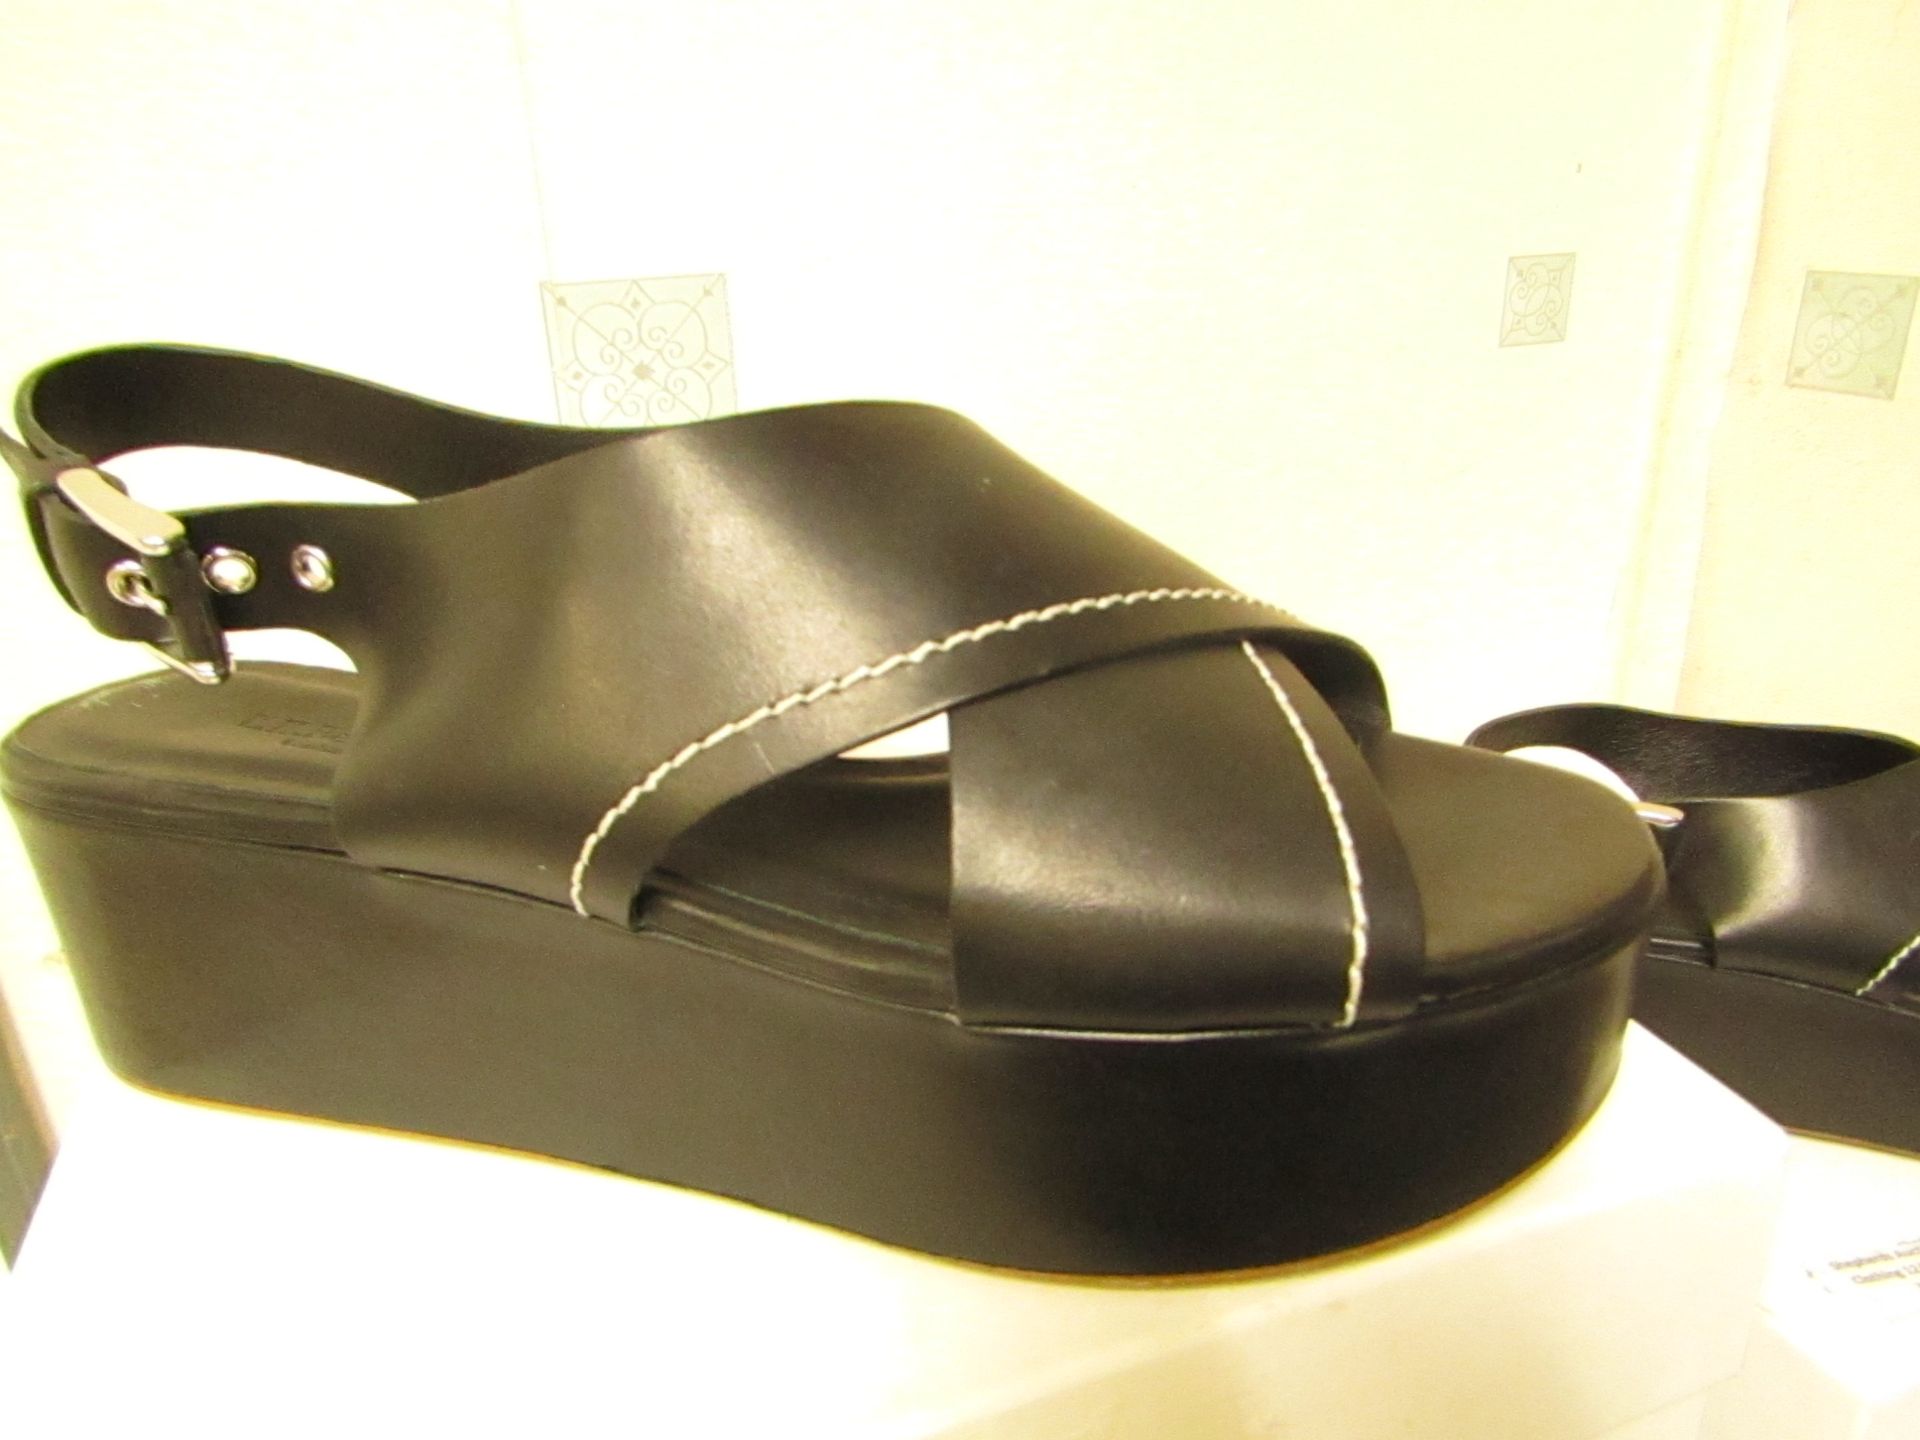 L K Bennett London Sima Black Veg Leather Shoes size 36 RRP £250 new & boxed see image for design